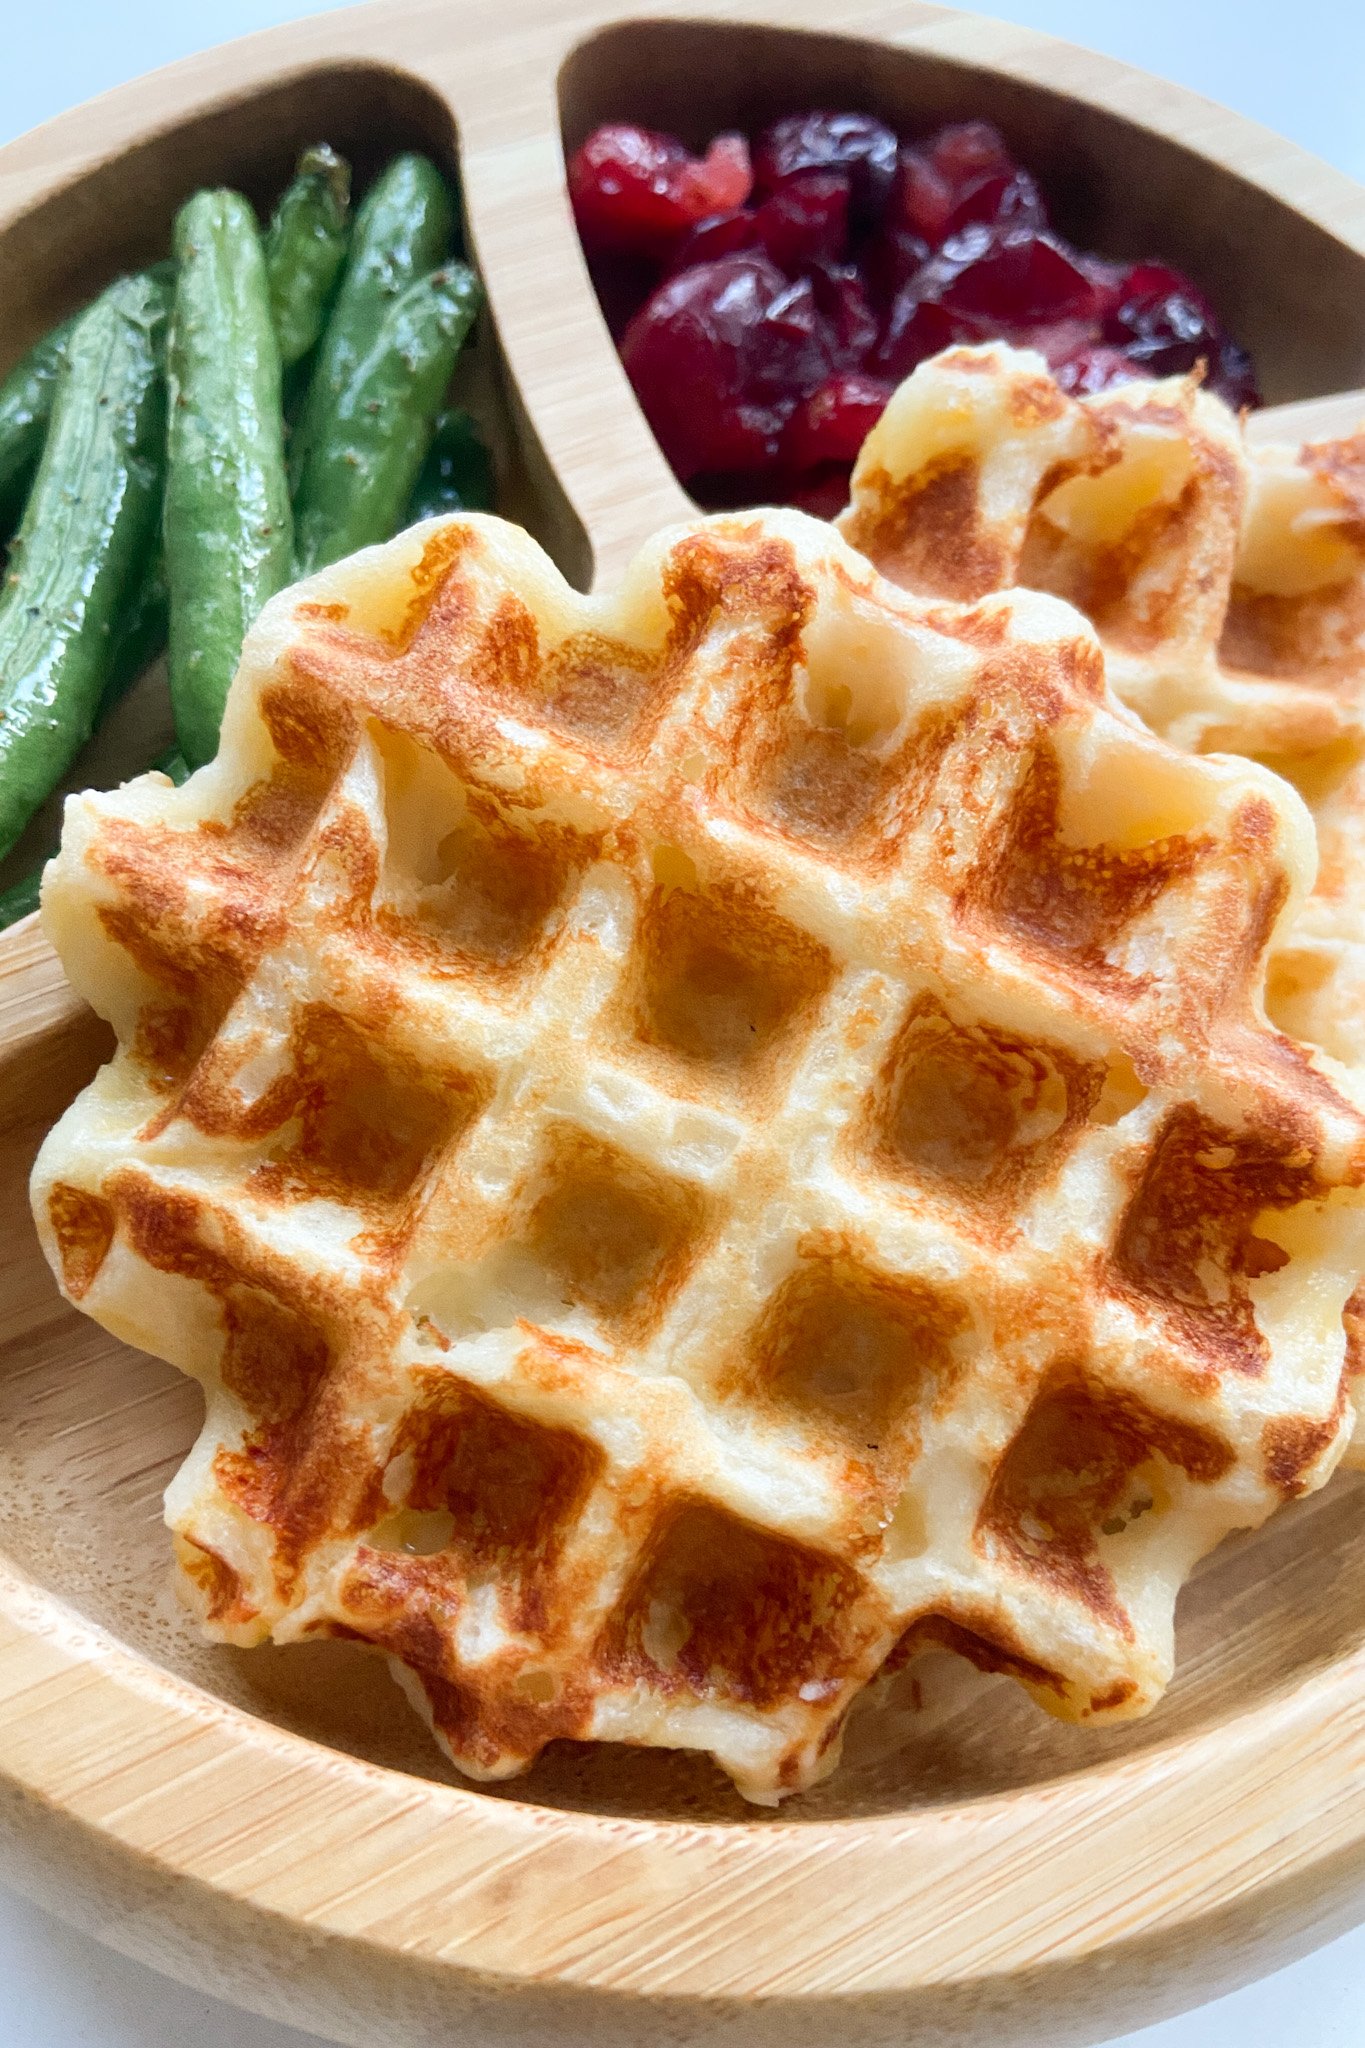 Mashed potato waffles served with green beans and mashed potatoes.